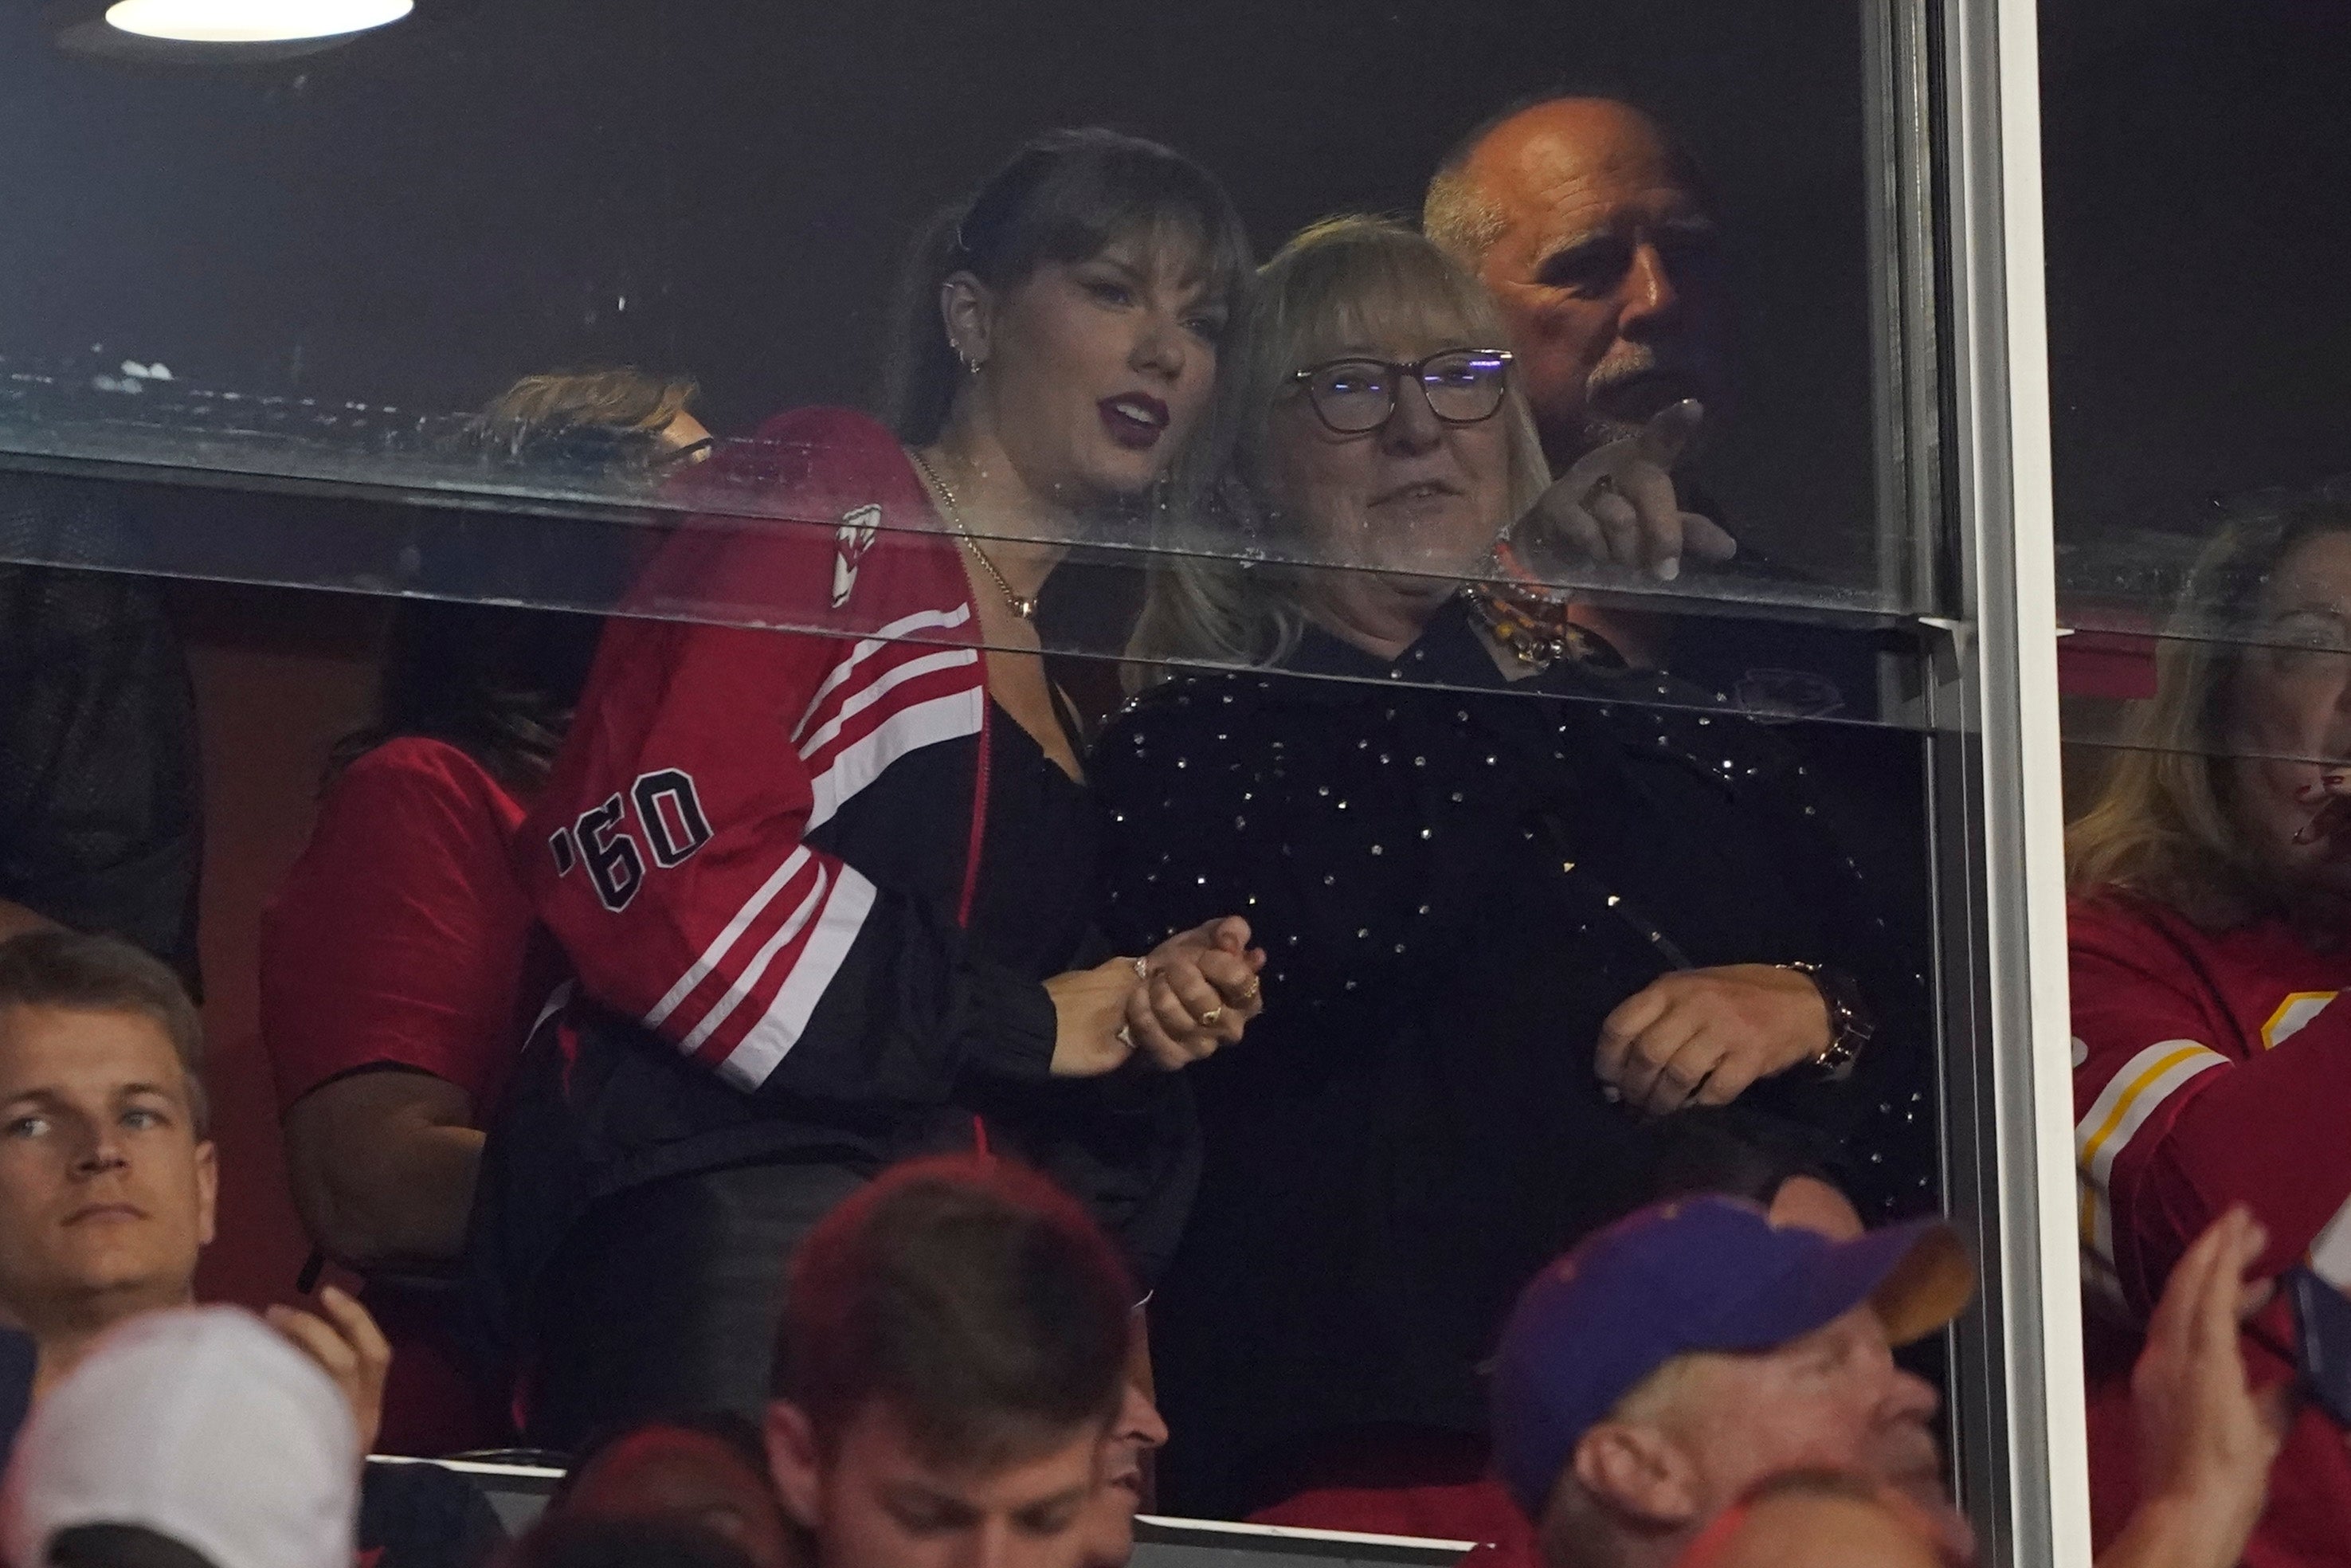 Swift in conversation with Kelce’s mother Donna